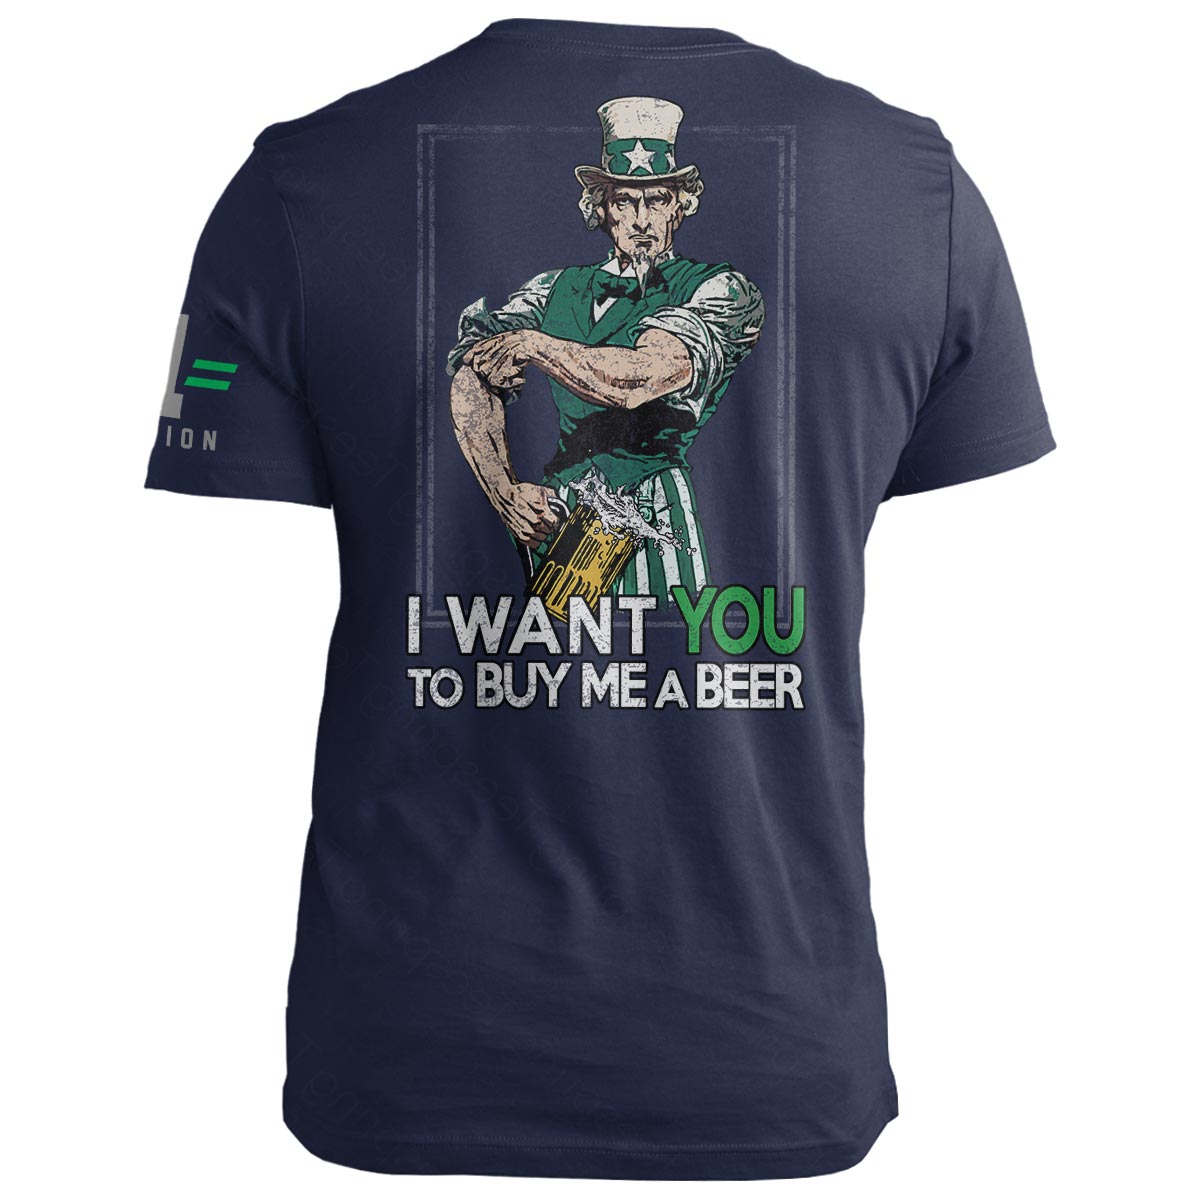 I want YOU to buy me a beer